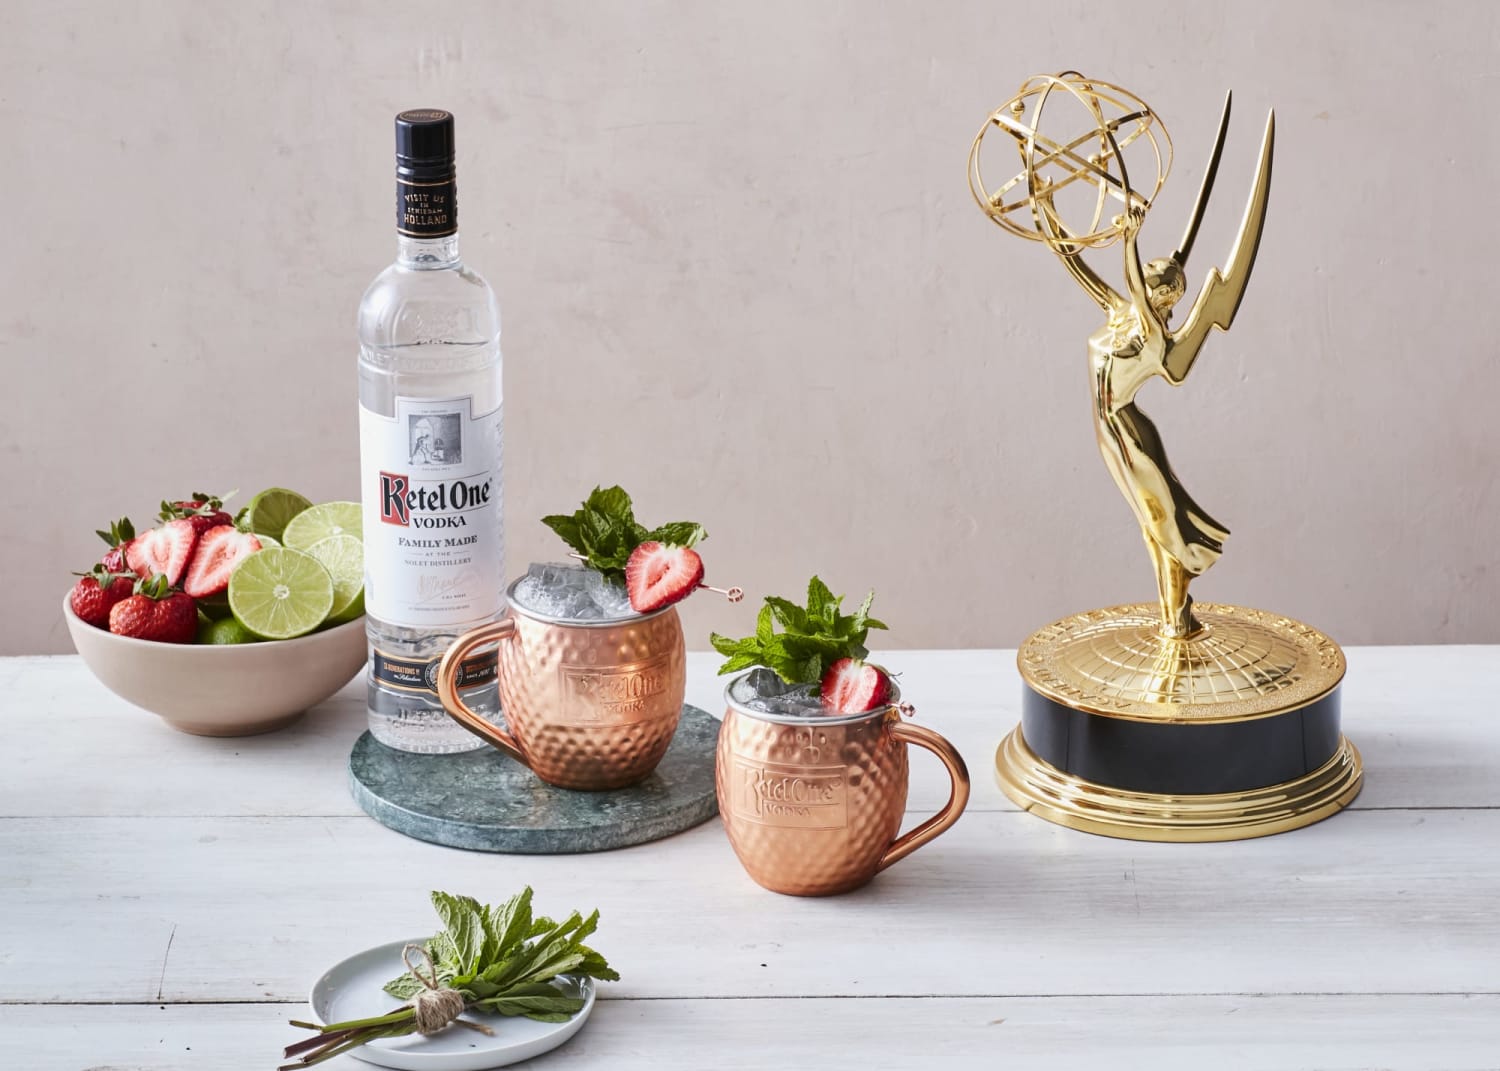 Charles Joly shakes up Emmys cocktails perfect for at home celebrations